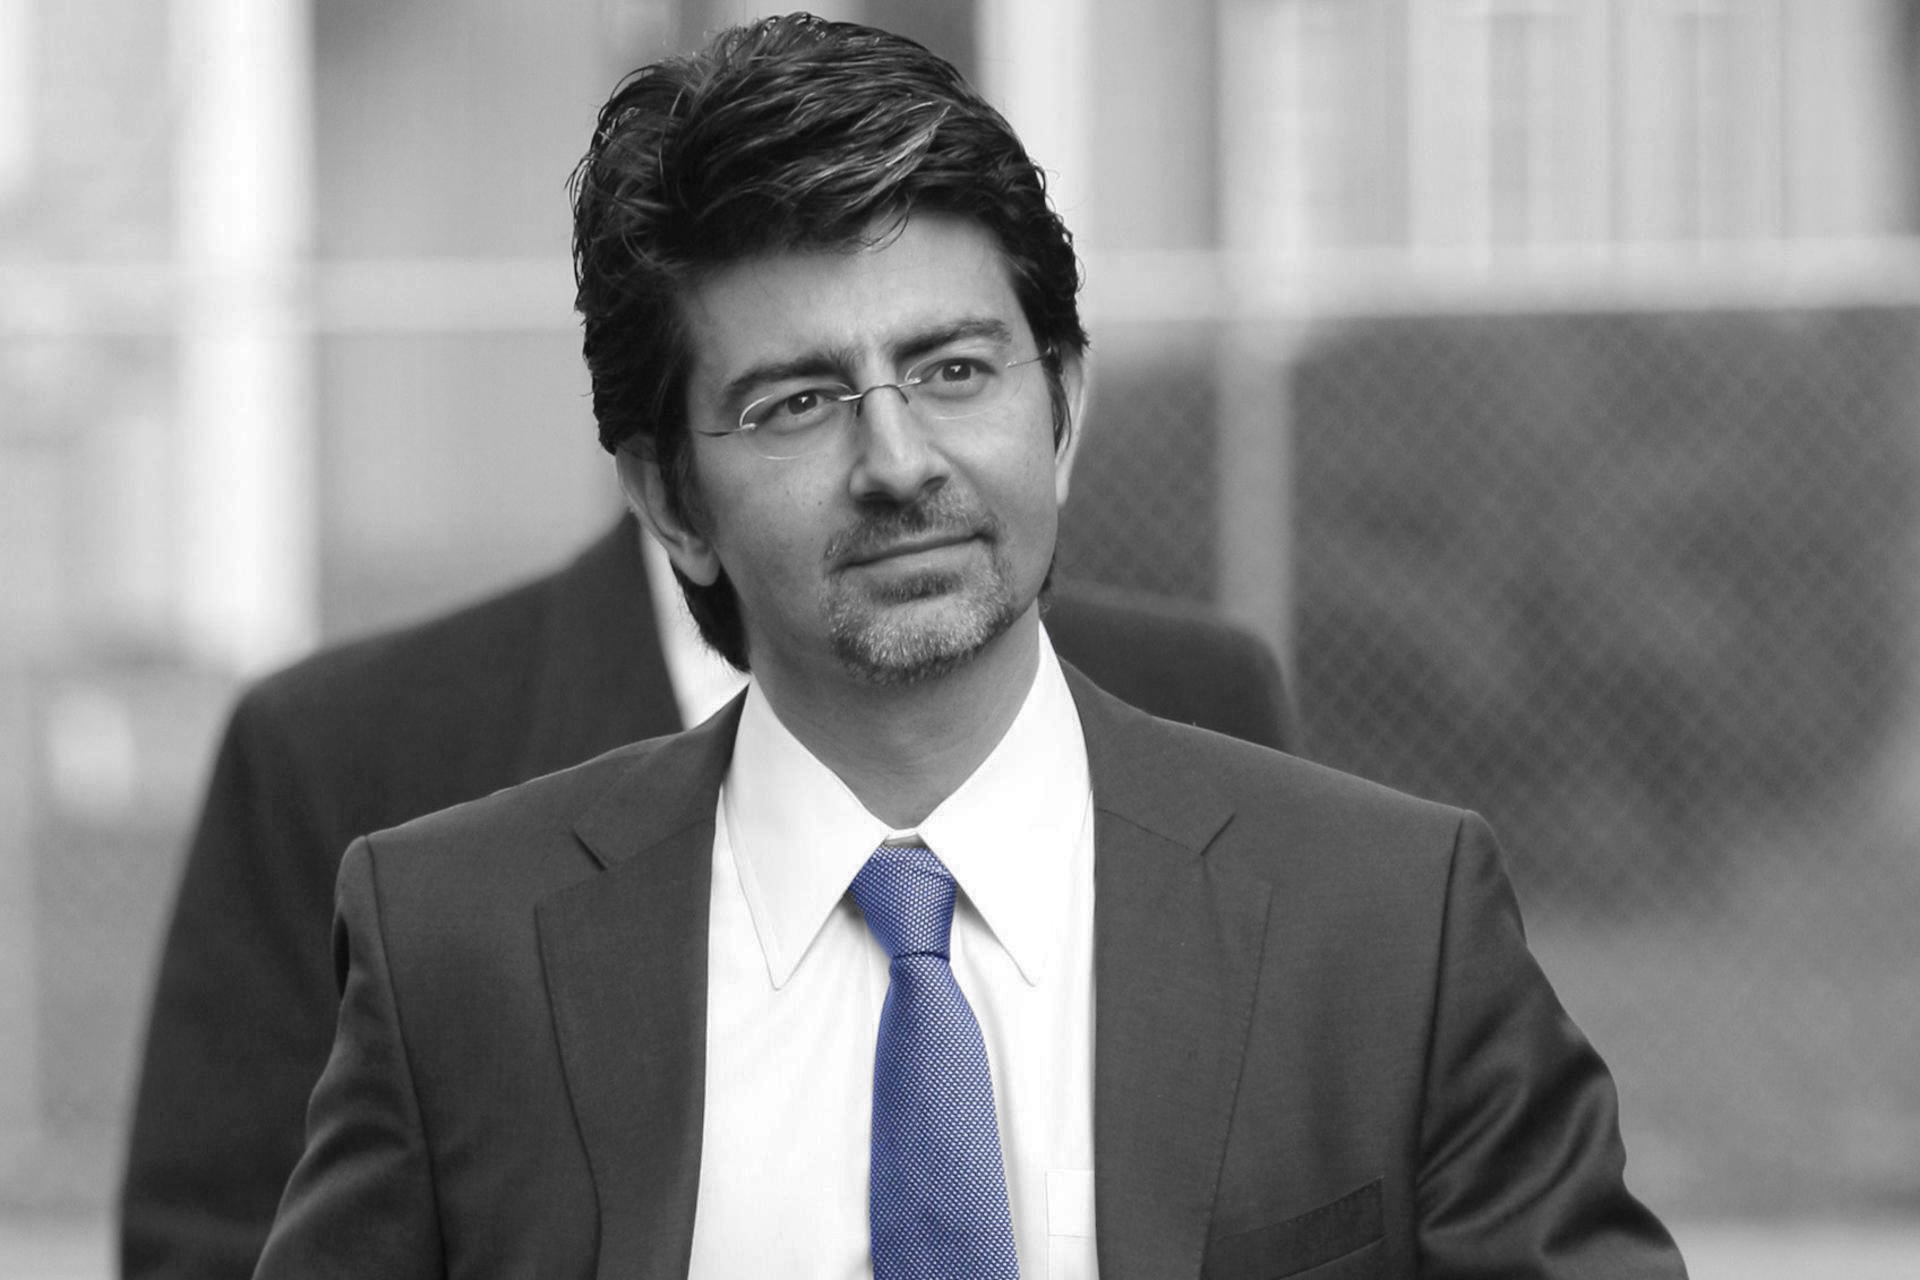 "If you can overcome the initial mistrust that is often felt towards strangers, then you will create wonderful things". The emotional intelligence of billionaire Pierre Omidyar